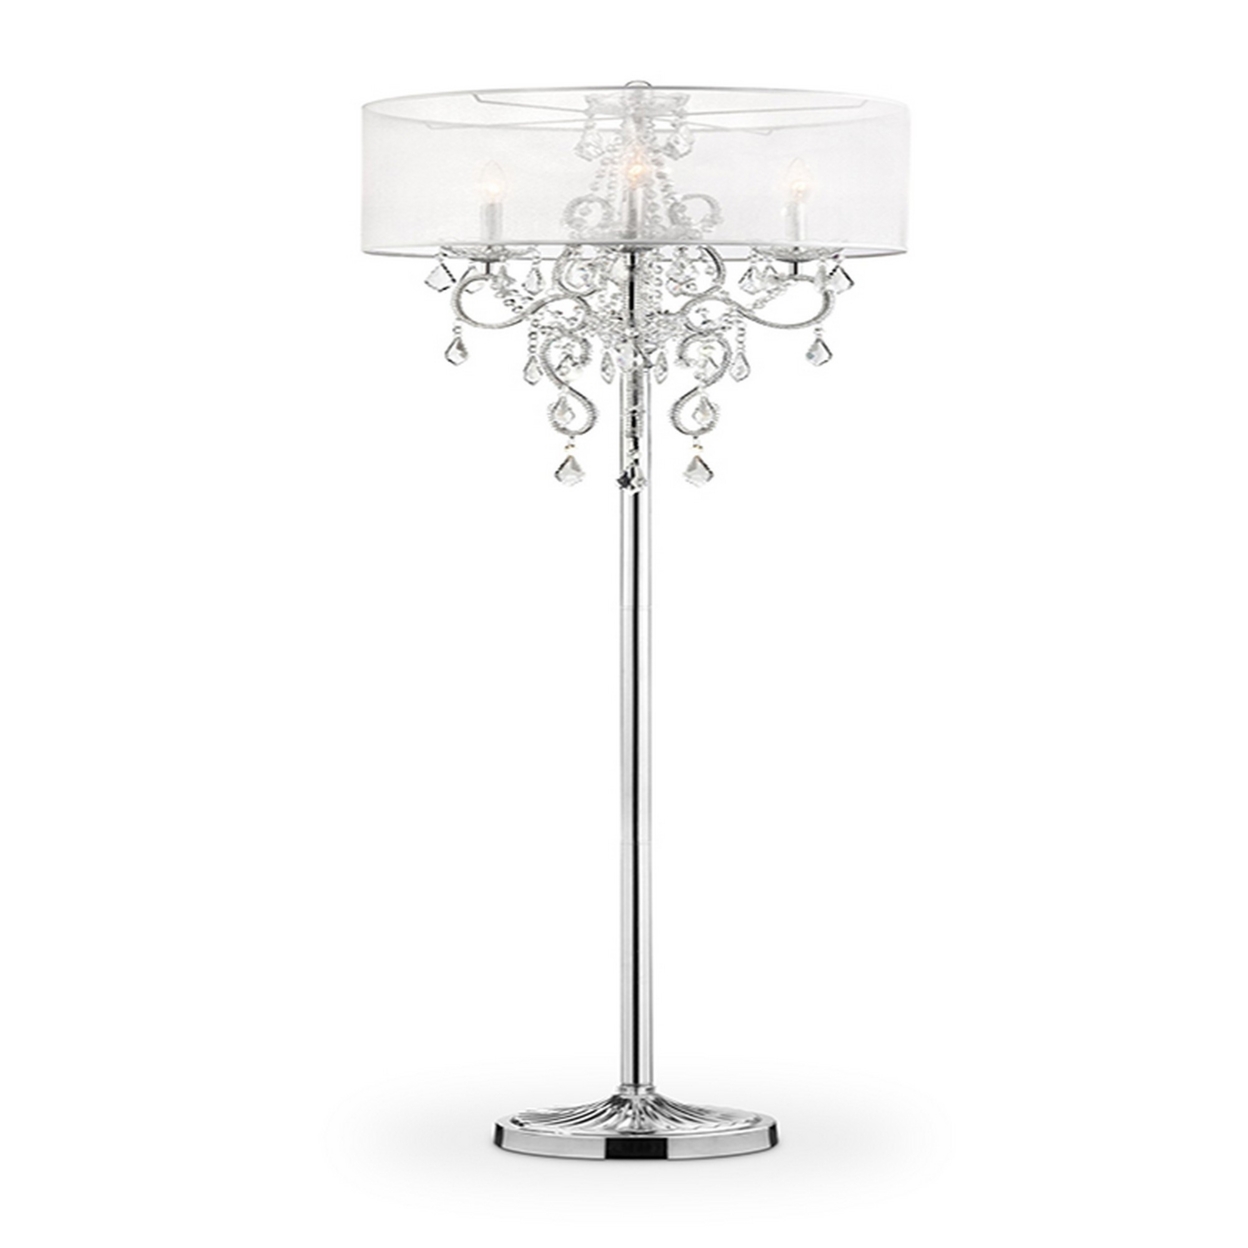 Floor Lamp With Metal Base And Hanging Crystals, Silver- Saltoro Sherpi